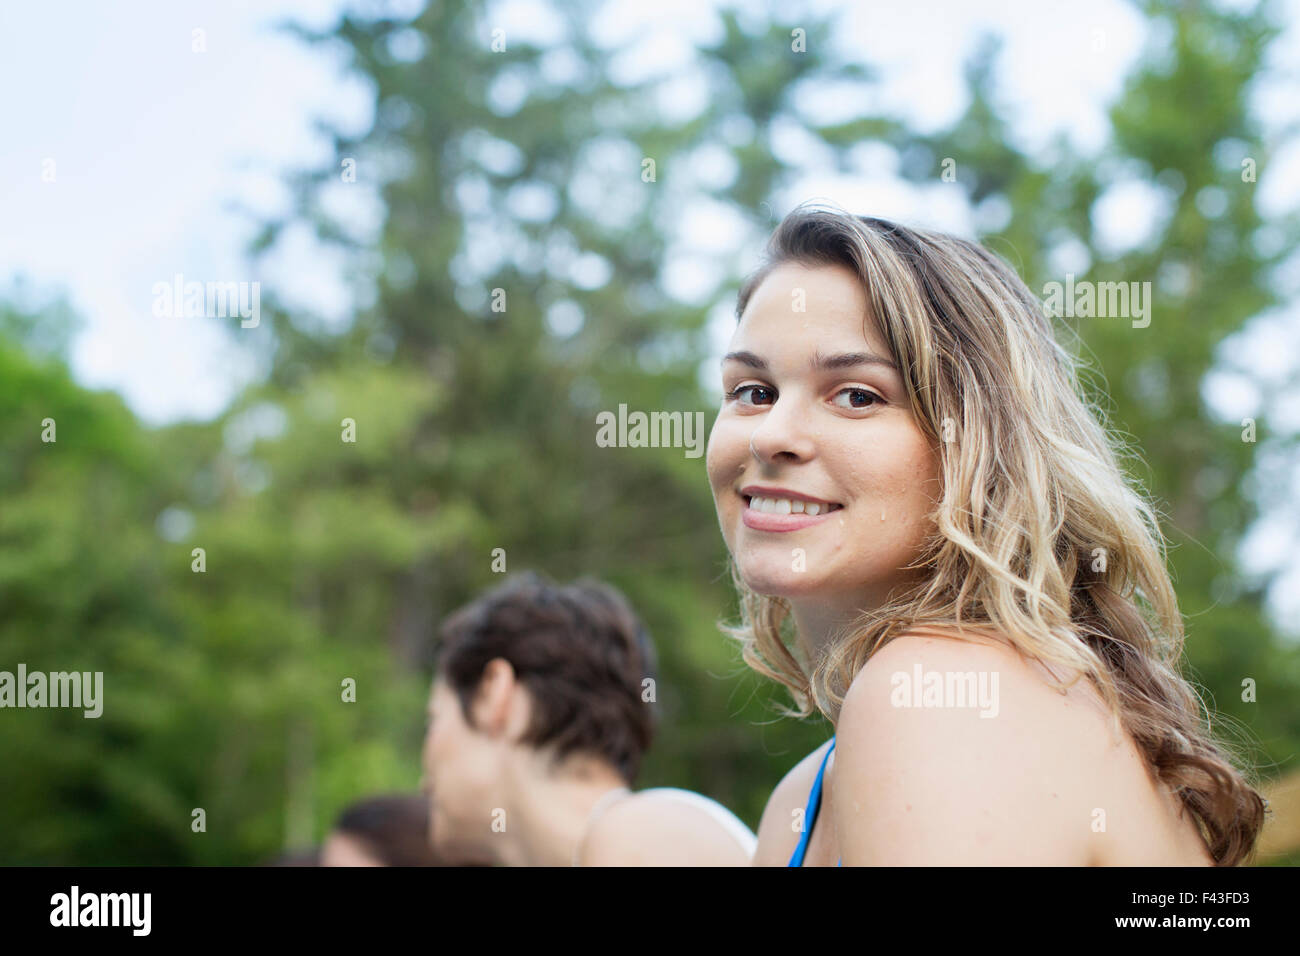 A young woman smiling and looking at the camera. Stock Photo